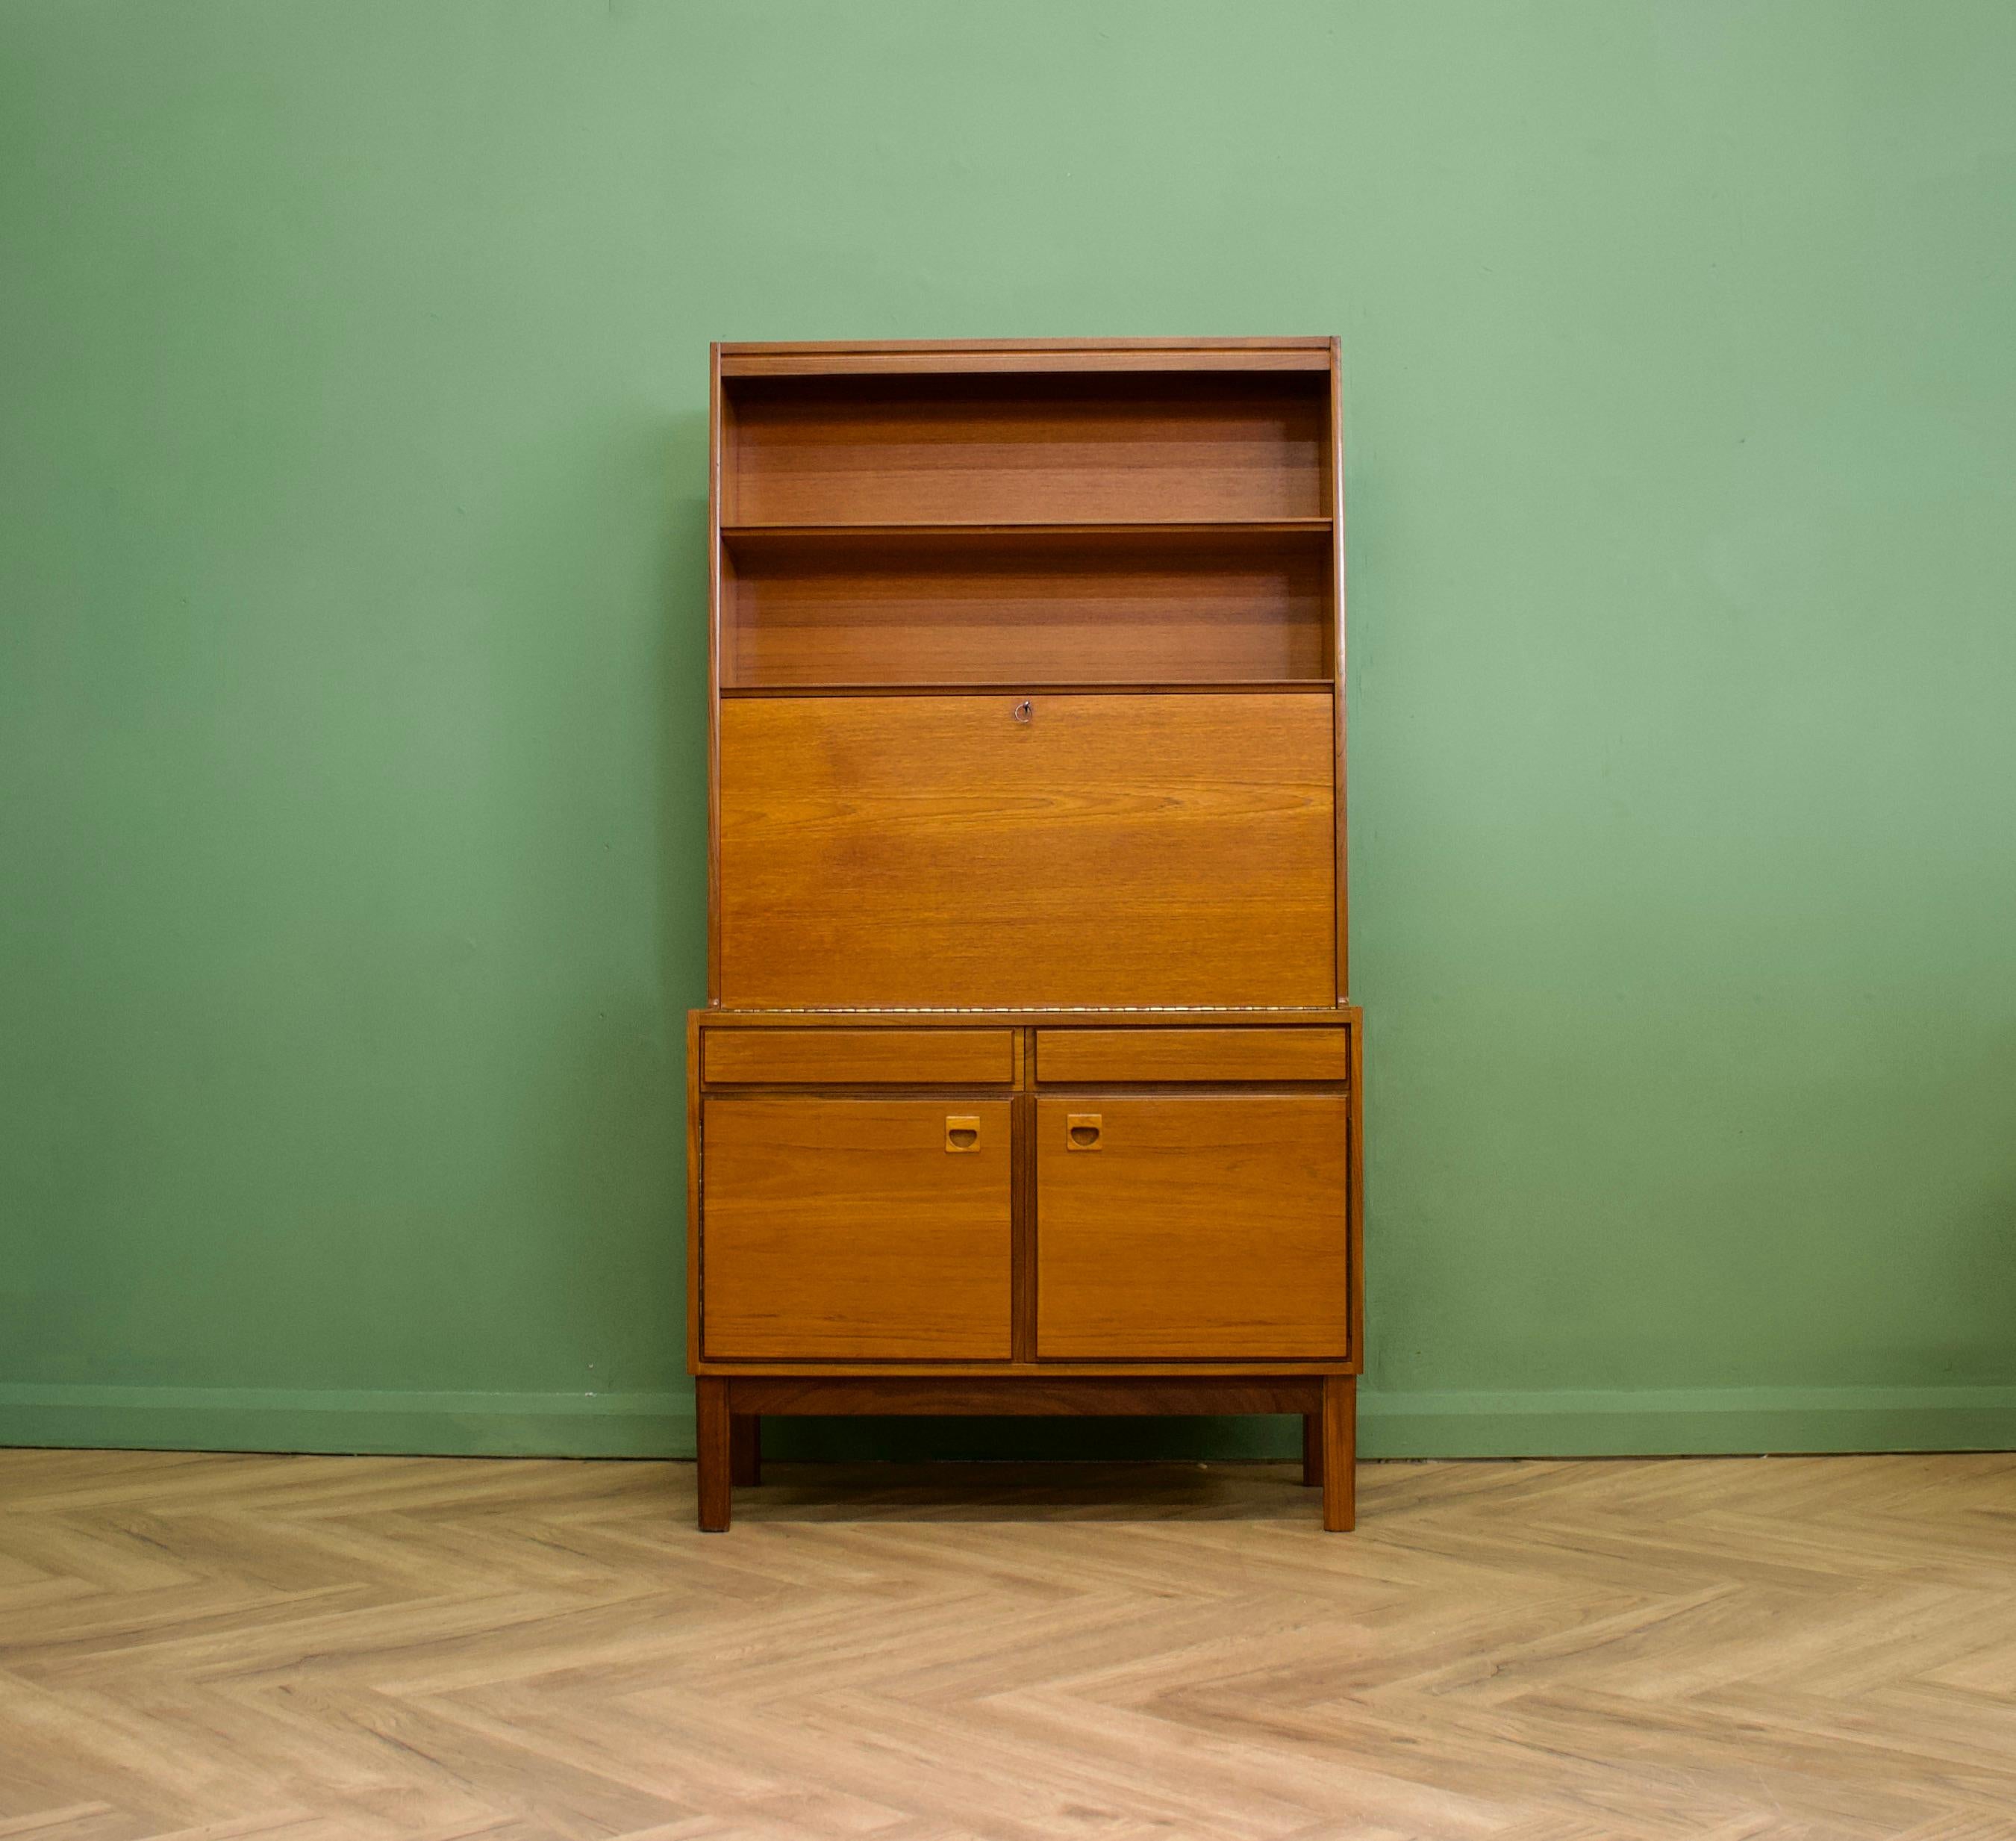 A mid century teak bureau bookcase from Vanson, circa 1960s

The piece is quality made - featuring two shelves to the top and a pull down desk area with additional storage and shelving inside

Each of the two  drawer fronts are made from solid teak